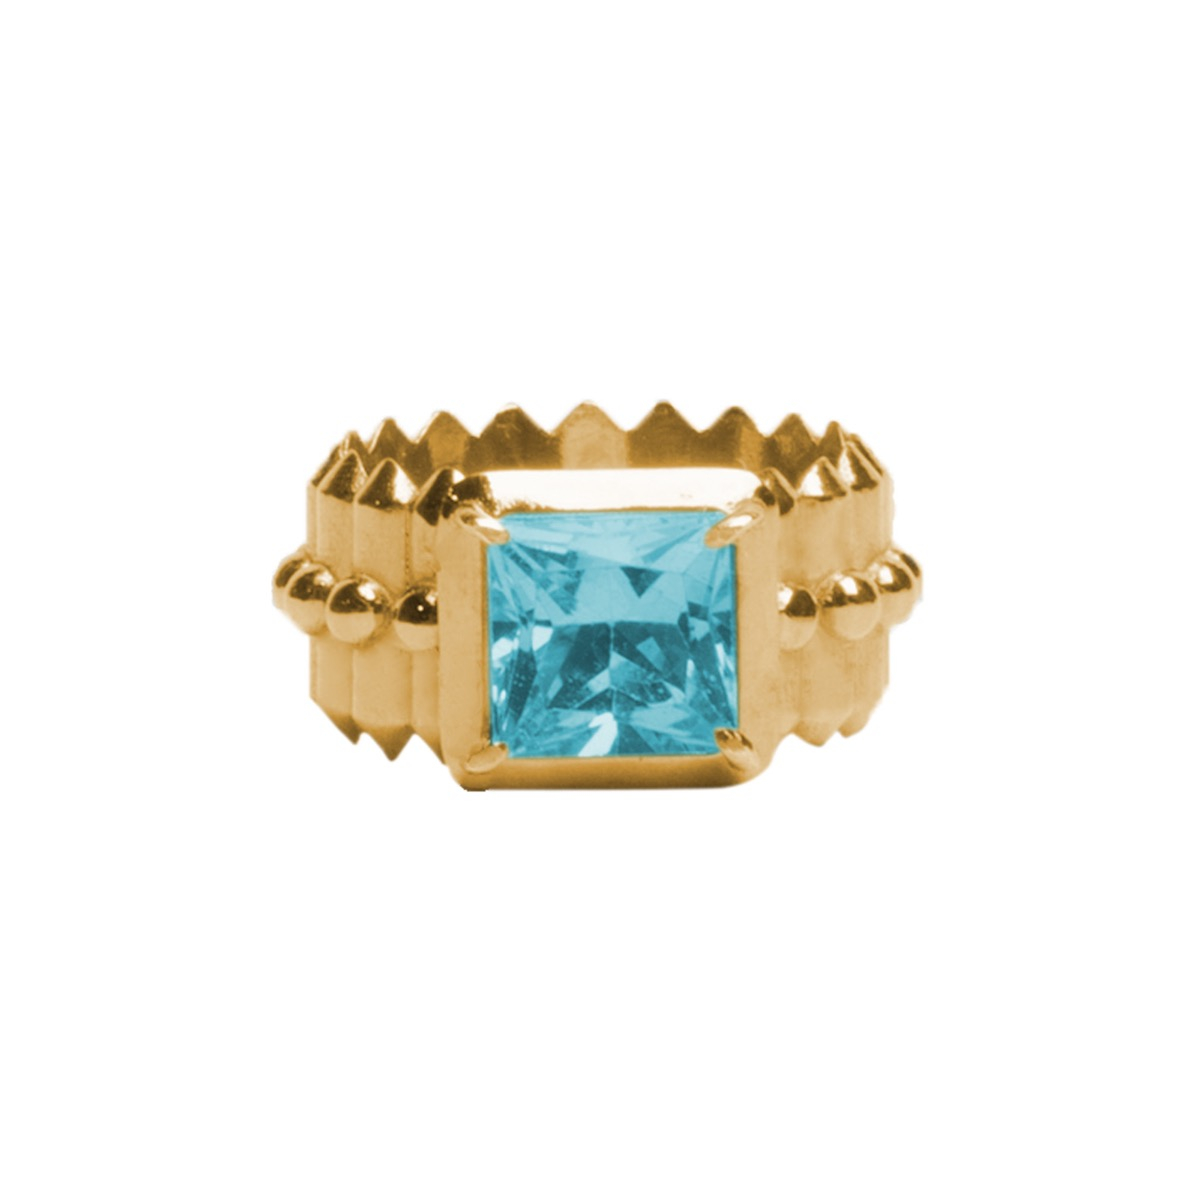 9K Yellow Gold Statement Ring with Cushion-Cut Blue Topaz - 